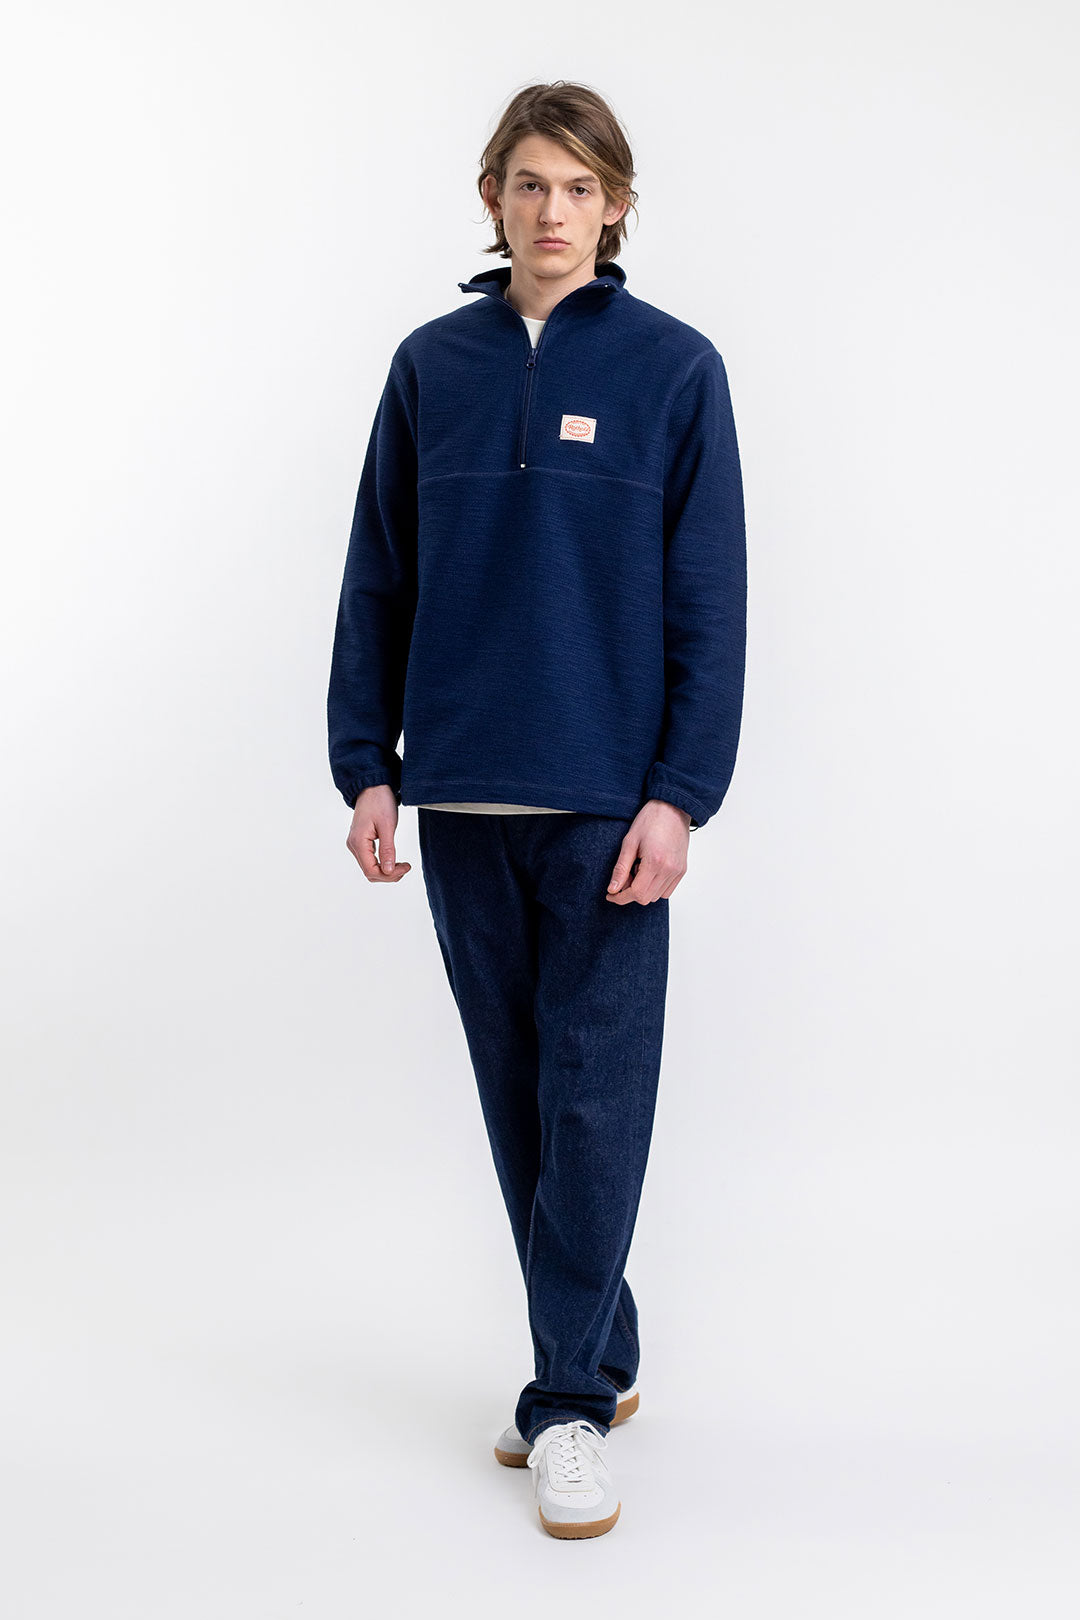 Dark blue zip-up sweatshirt Divided 100% cotton from Rotholz